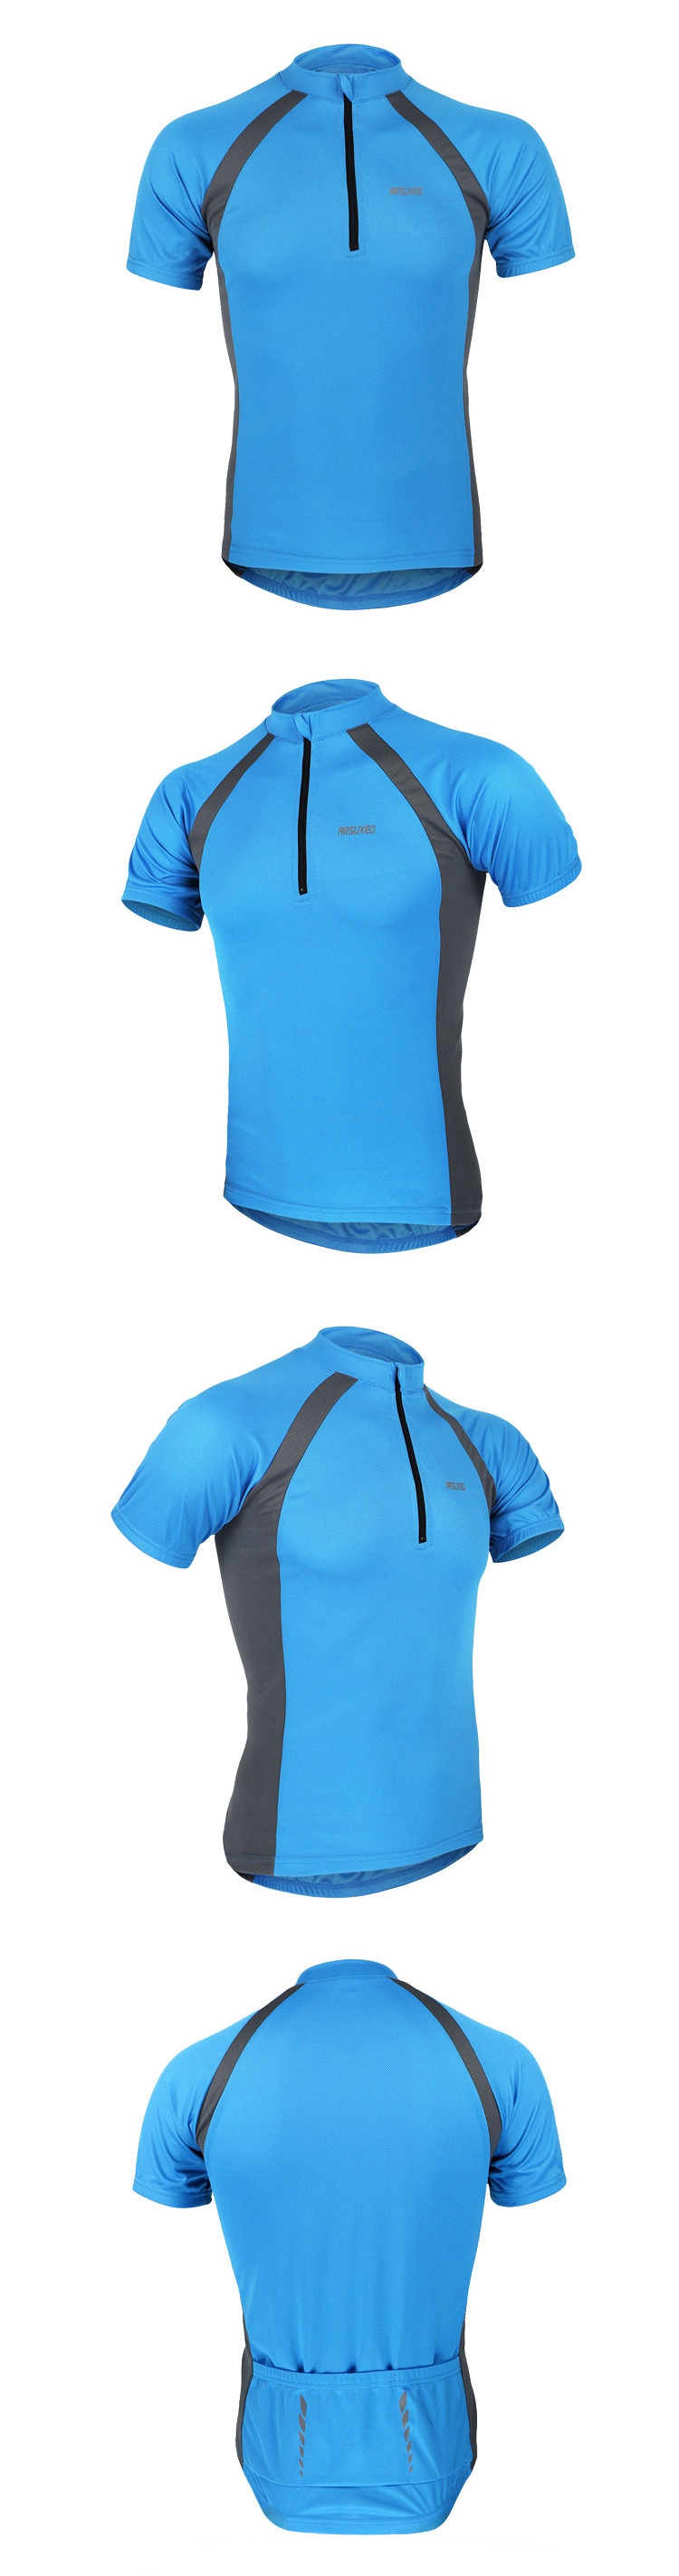 ARSUXEO-Cycling-Shirt-Bicycle-Short-Sleeves-Sports-Clothes-Summer-Breathable-Quick-Dry-Wicking-1066283